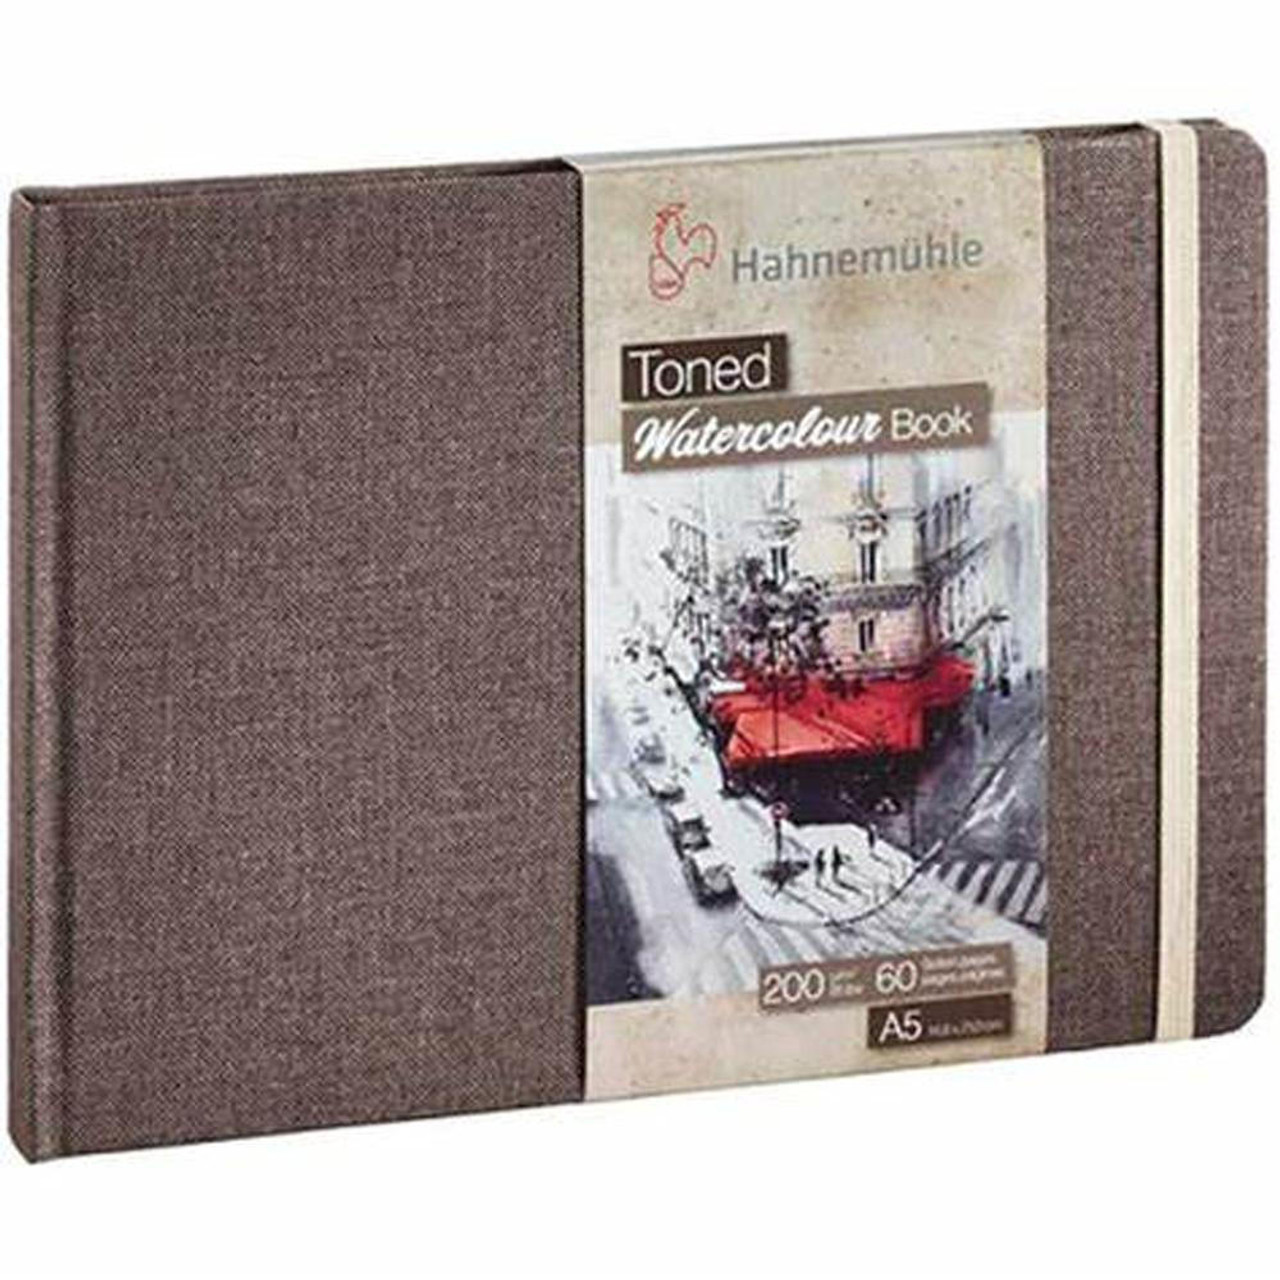 Hahnemuhle Toned Grey Watercolor Paper Book, 30 Sheets, Square